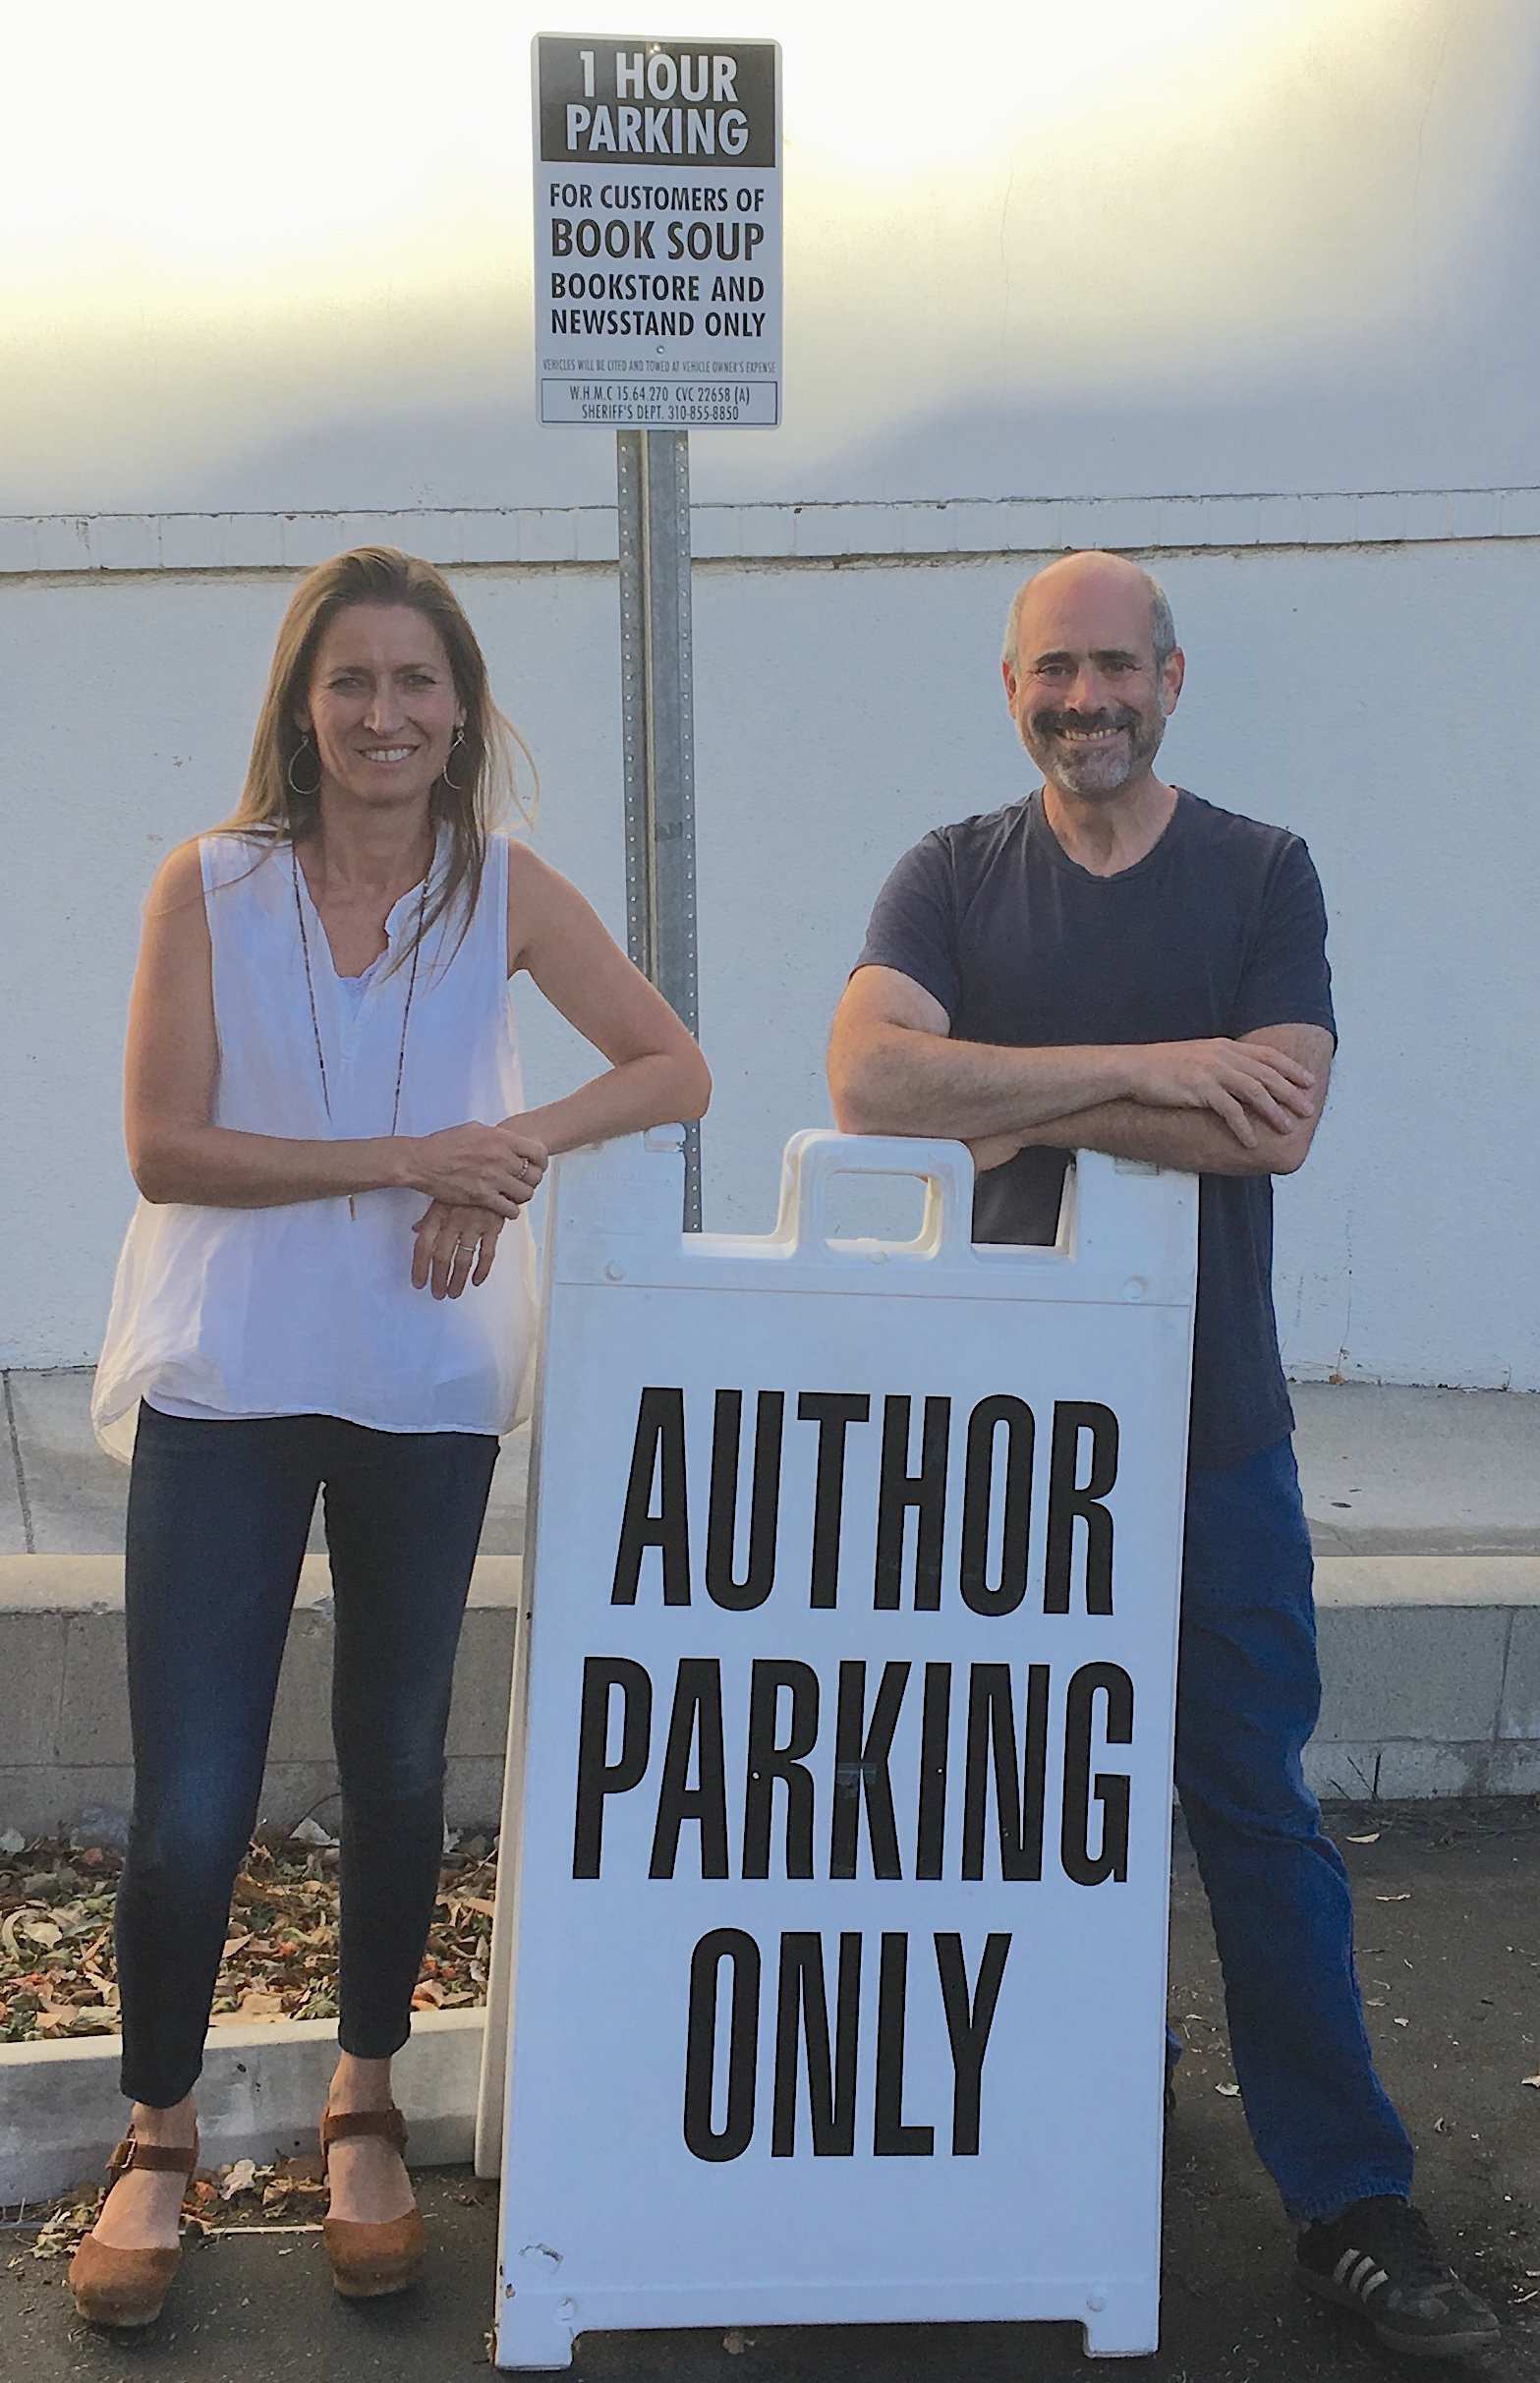 Mark Eisner and Jessica Powell presenting “venture of the infinite man” at Book Soup, LA